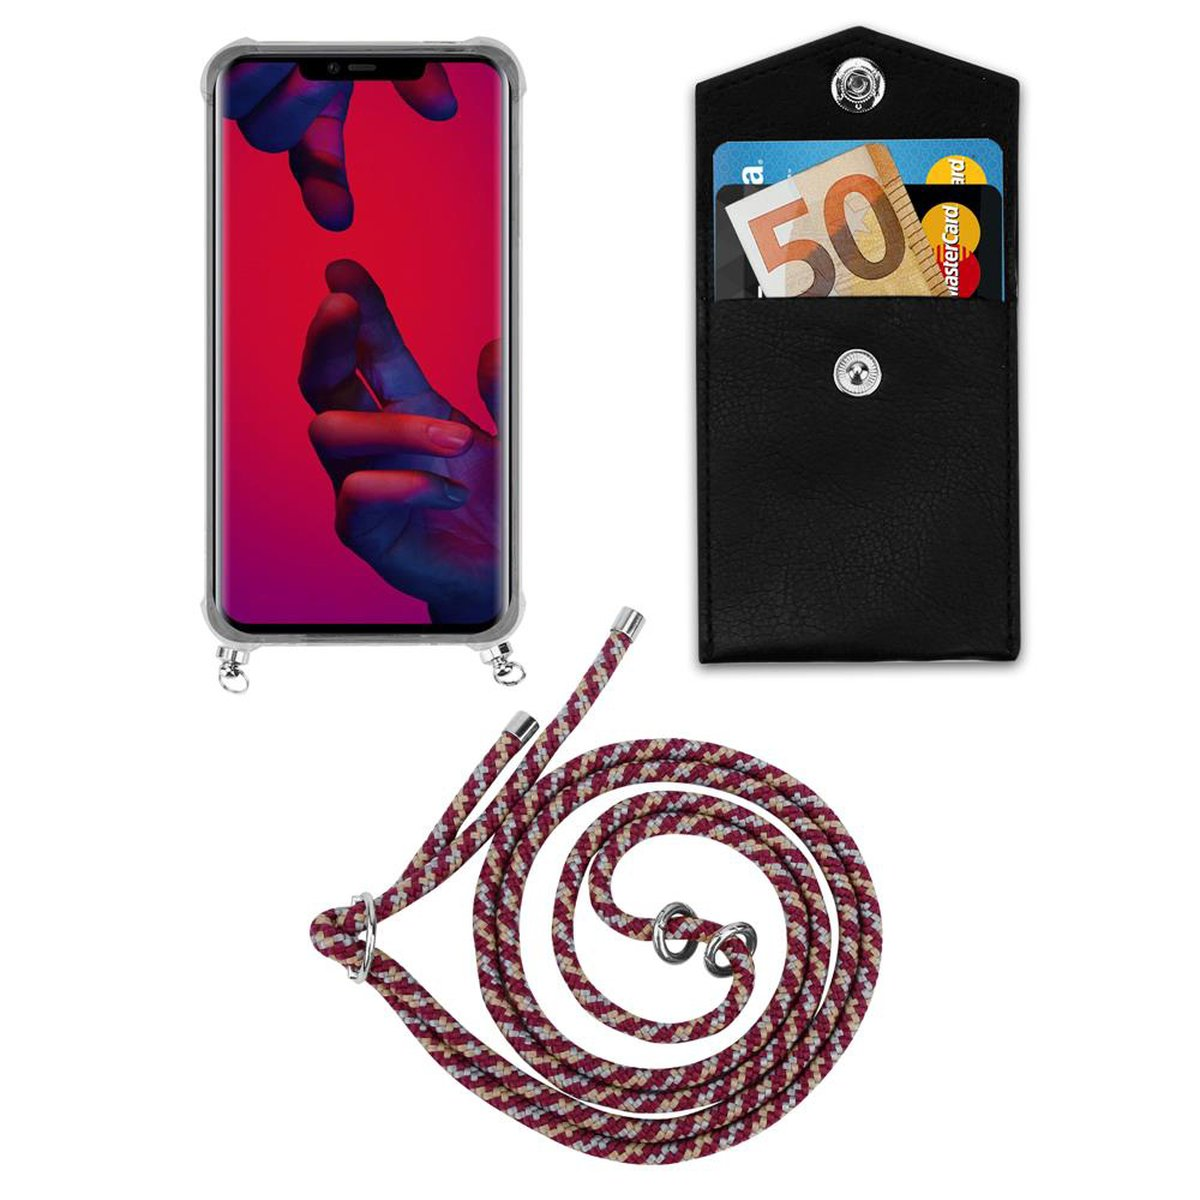 20 WEIß Huawei, Hülle, Backcover, MATE Band ROT Kordel Handy GELB und CADORABO Kette PRO, abnehmbarer Silber Ringen, mit